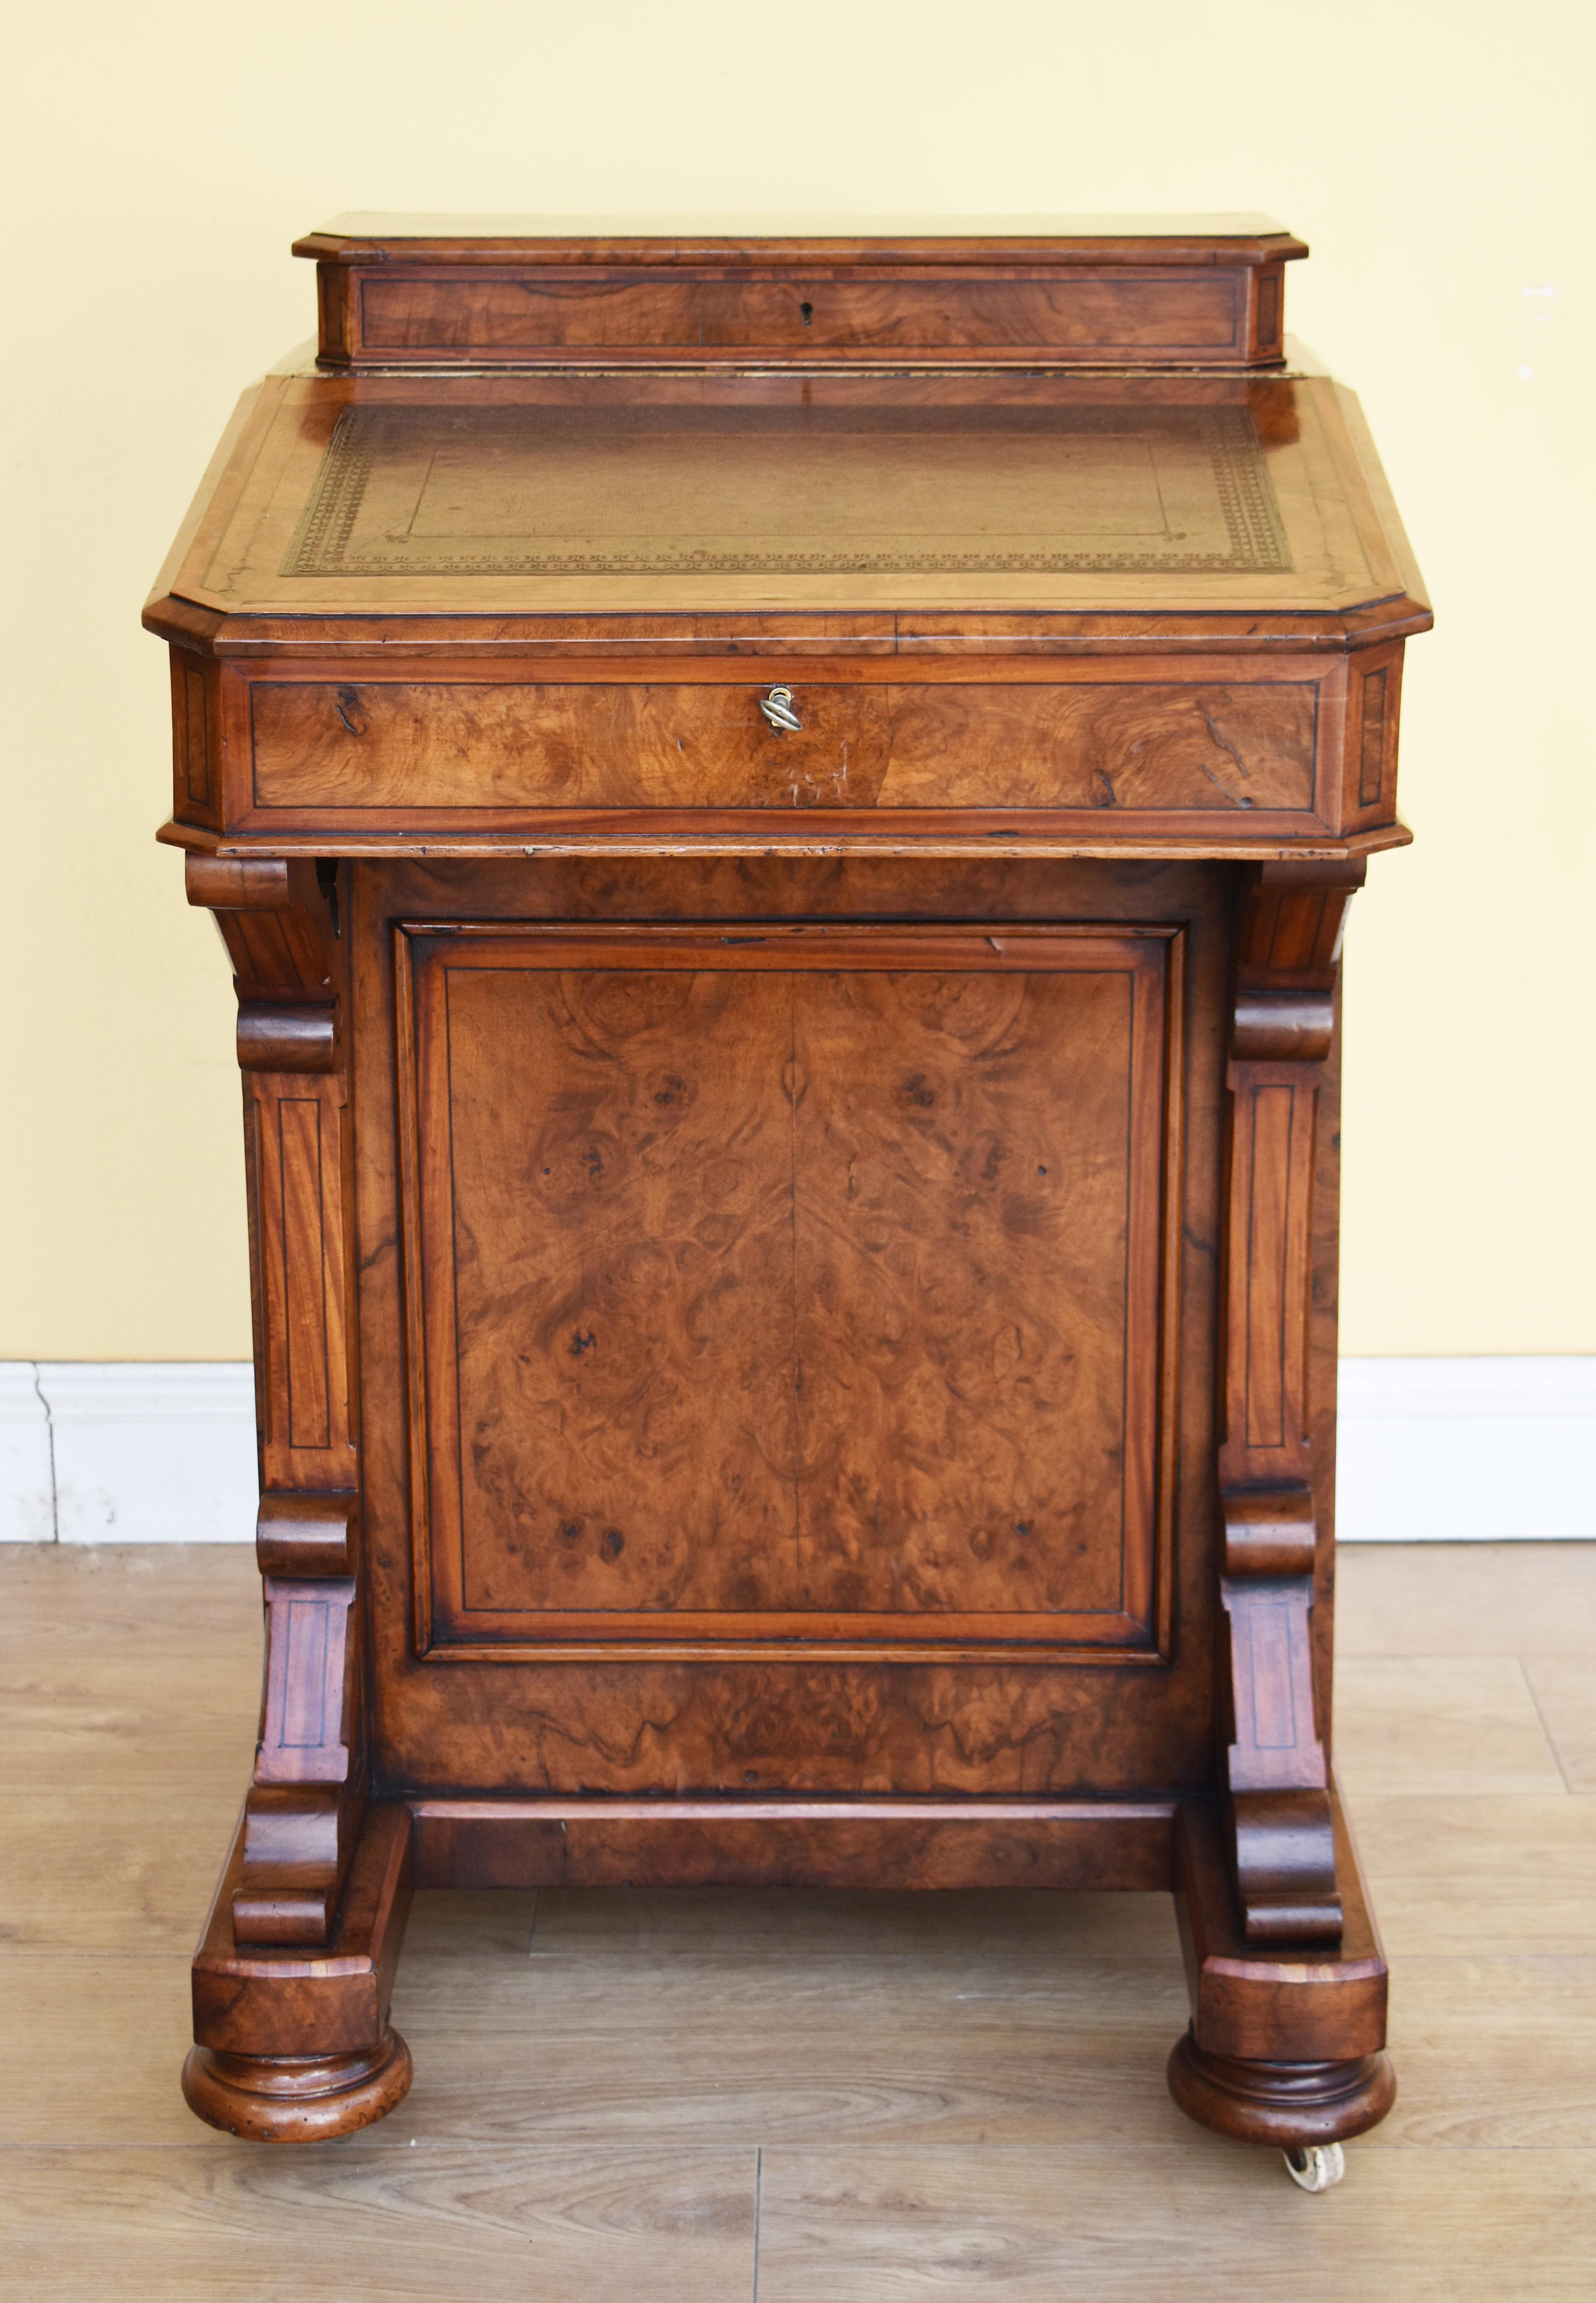 For sale is a Victorian burr walnut Davenport, the top having a rising lid, opening to reveal a fitted interior for stationary storage. Below this, the writing surface also lifts to reveal ample storage space. The davenport has one paneled side, and